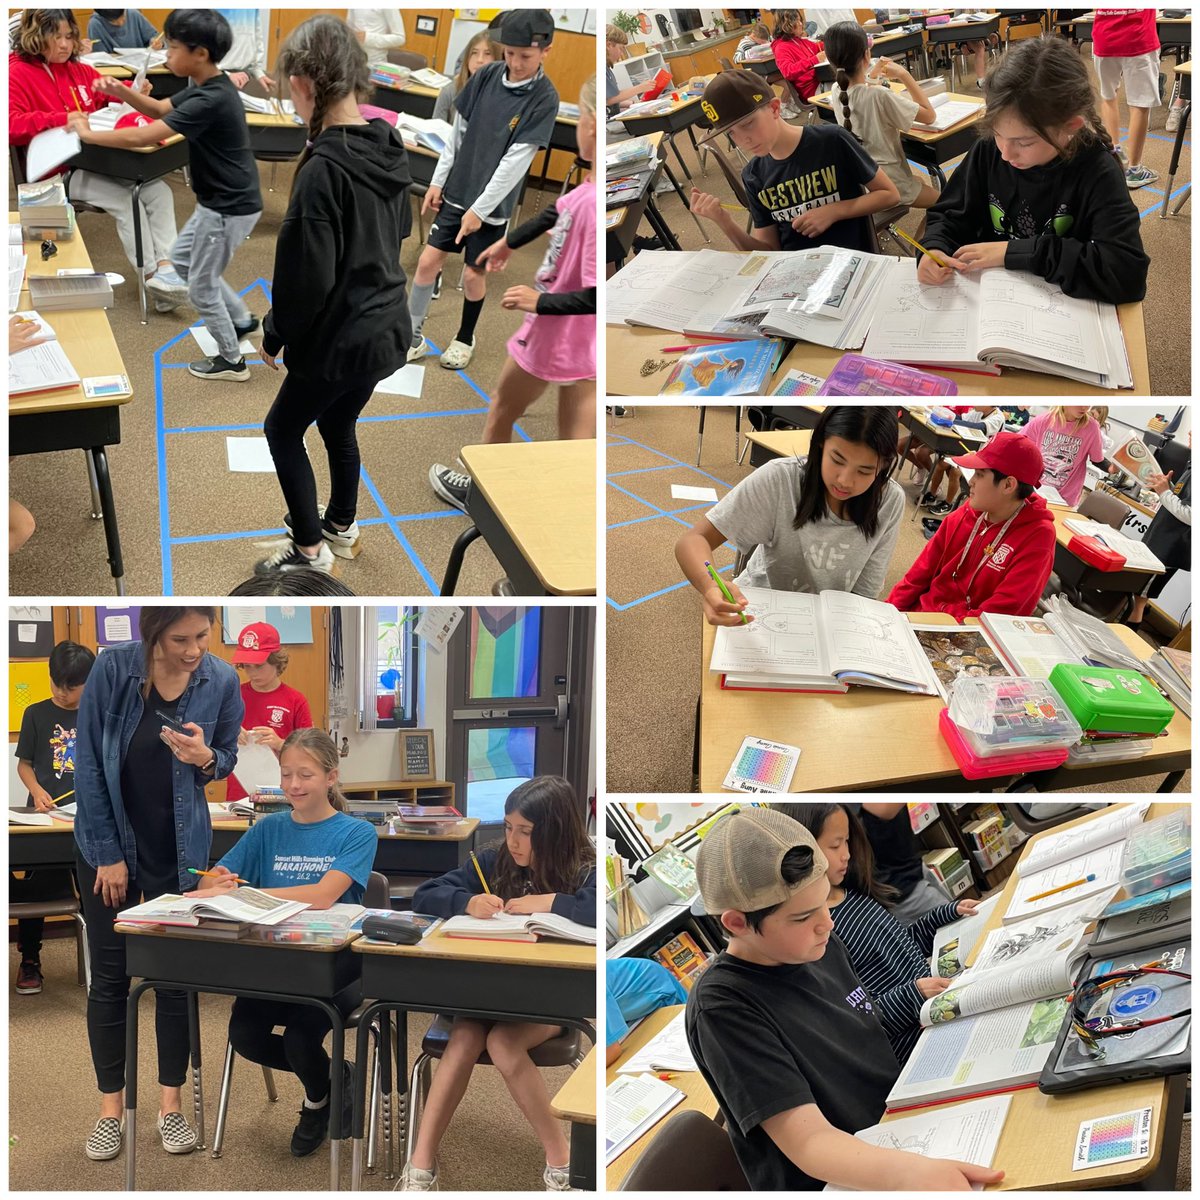 5th graders in social studies “exploring” a sunken ship for artifacts. Is what they found new technology, new products for the Americas, or their motive for exploration? Good luck, #SeagullExplorers! #SeagullSmarts #SeagullSocialStudies #SeagullsSoarTogether 💙 @SunsetHillsES